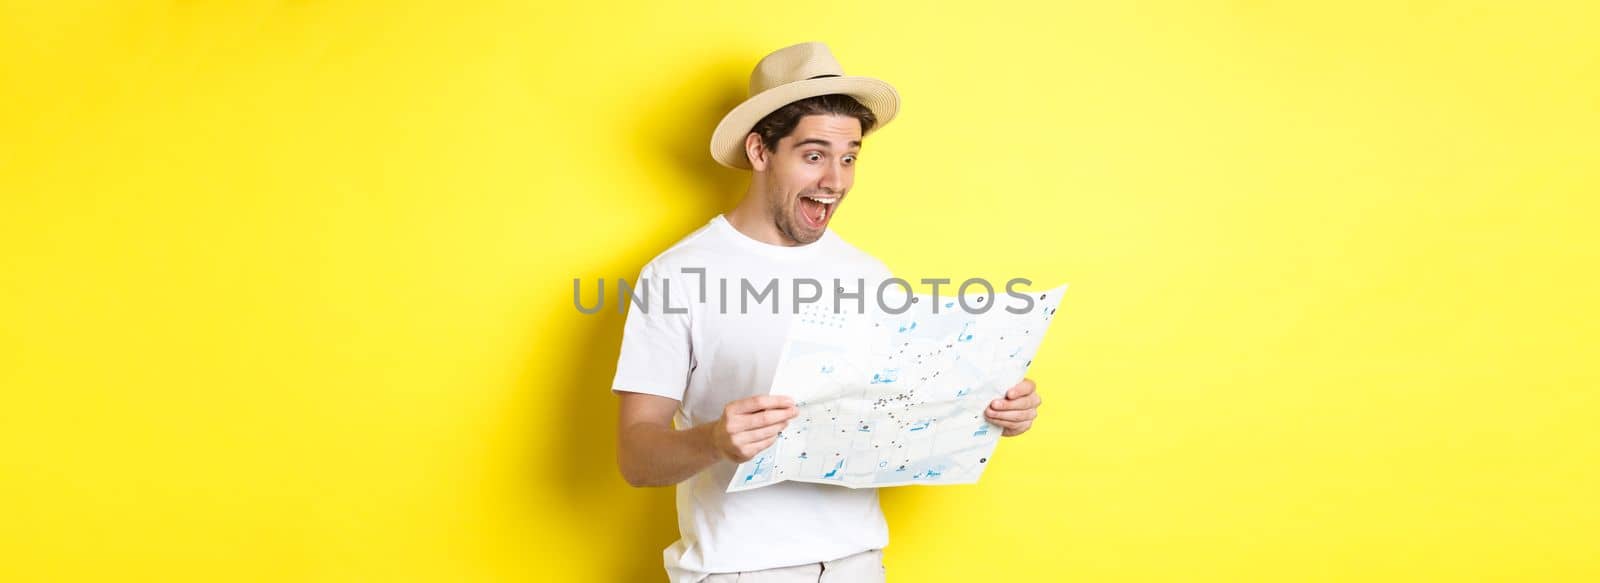 Travelling, vacation and tourism concept. Smiling happy tourist looking at map with sightseeings, standing against yellow background.